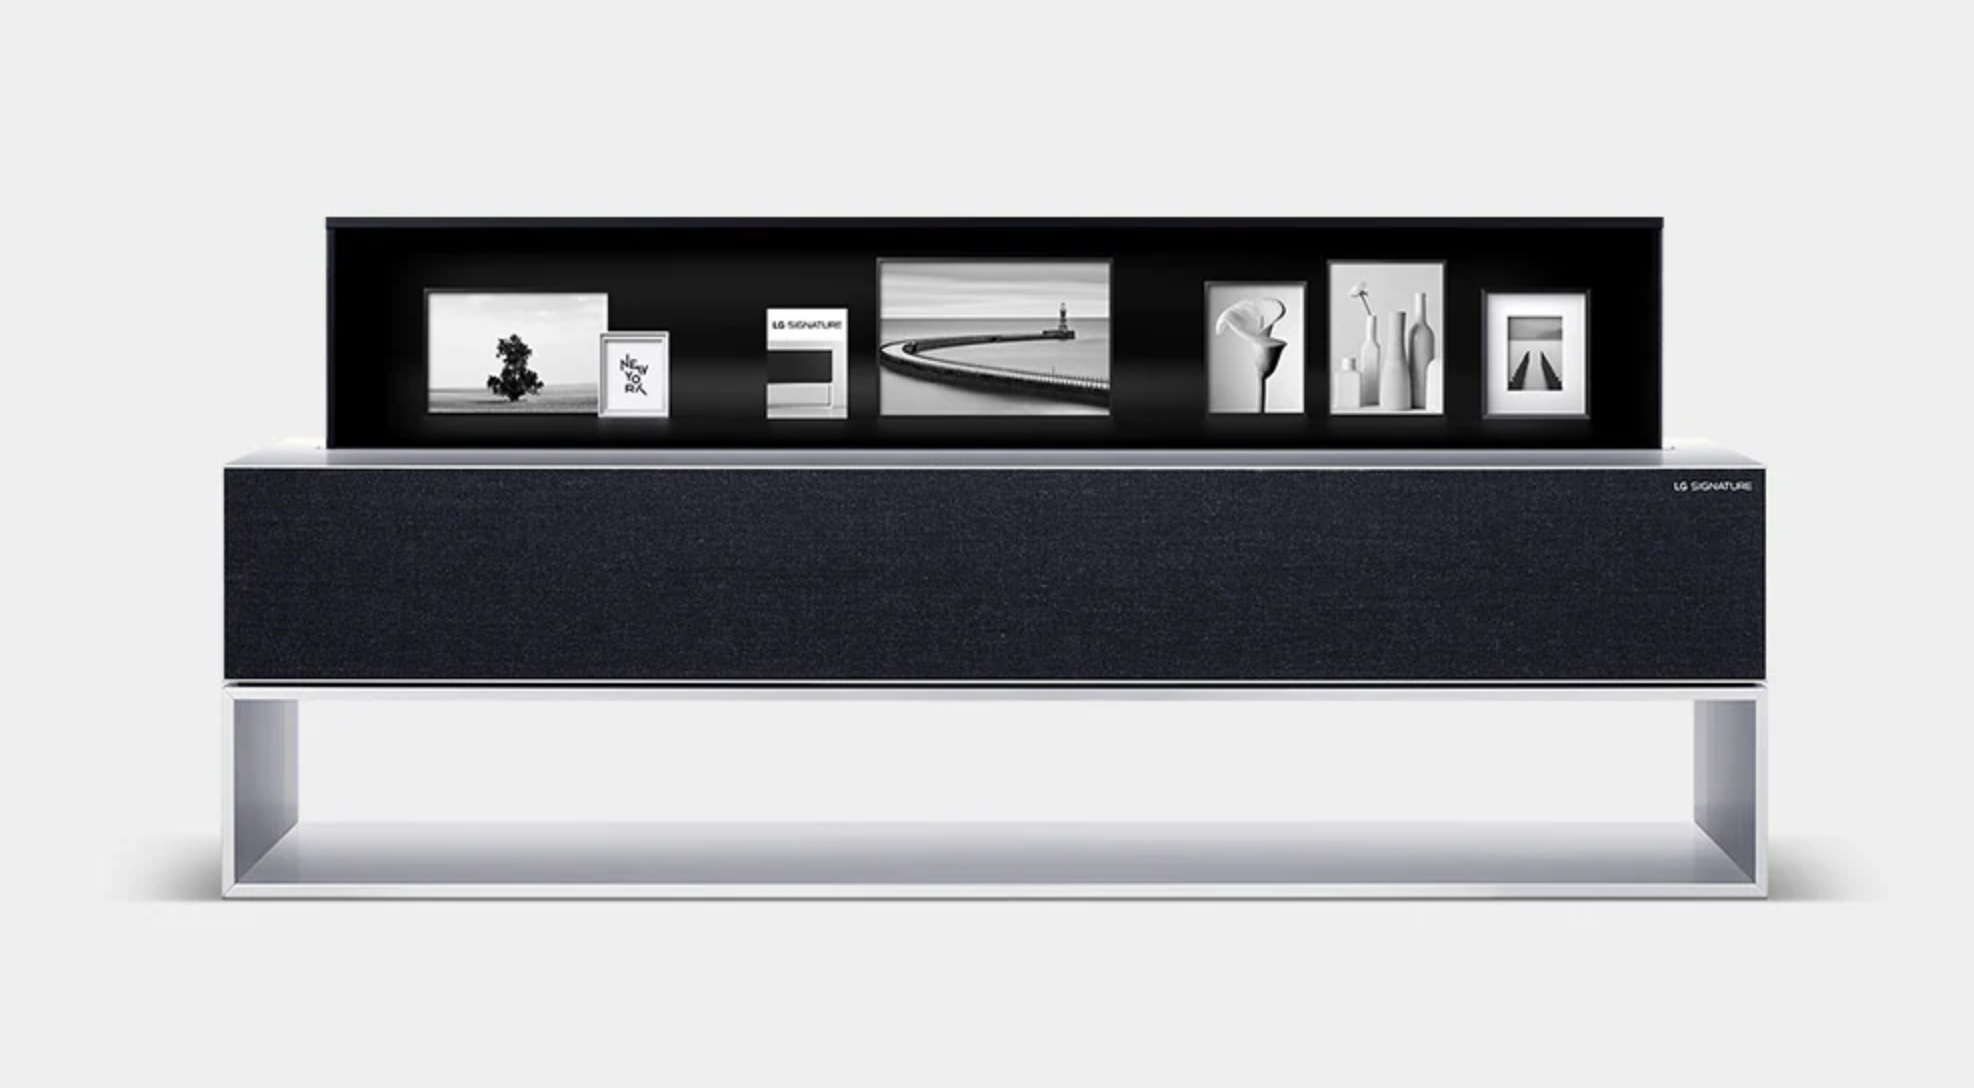 lg-signature-product-rollable-oled-tv-r1-line-view-thinq-home-dashboard-mode-bilderrahmen